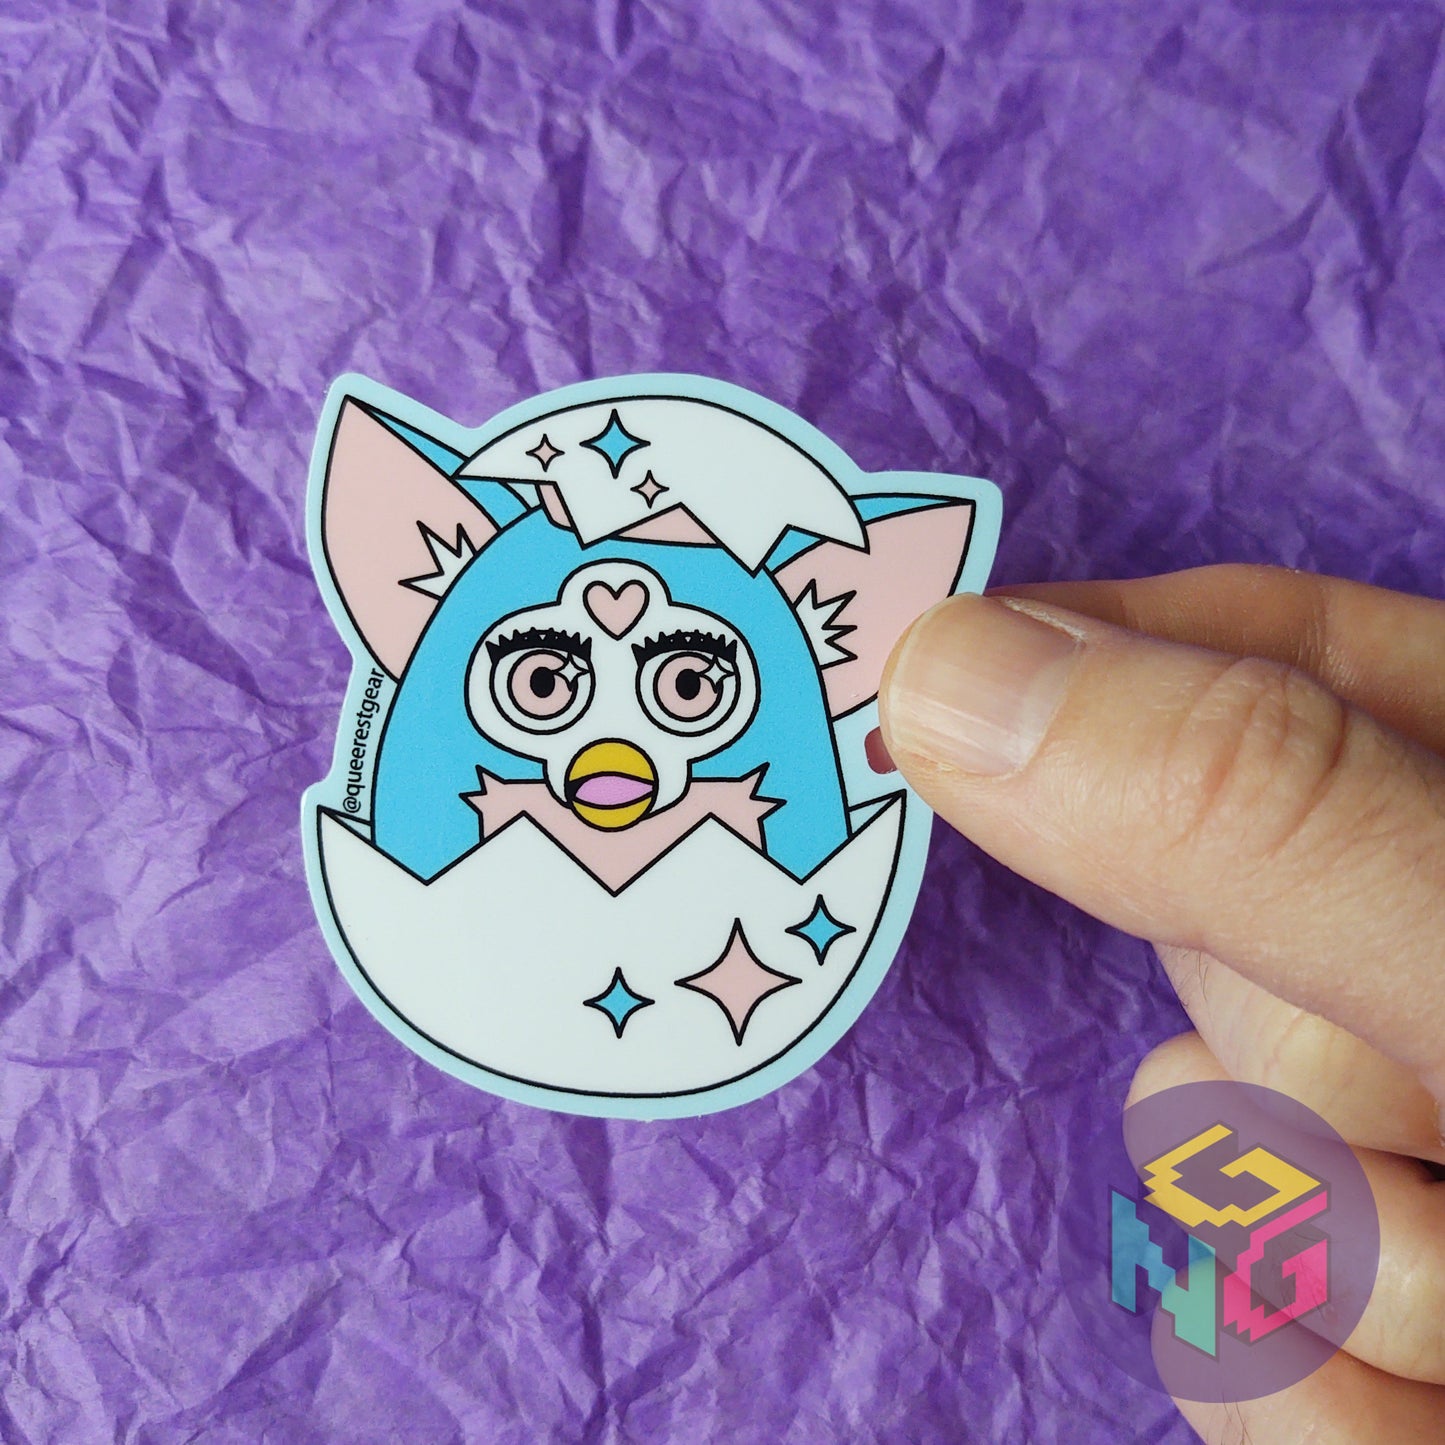 transgender furby sticker breaking out of an egg held in front of a purple background